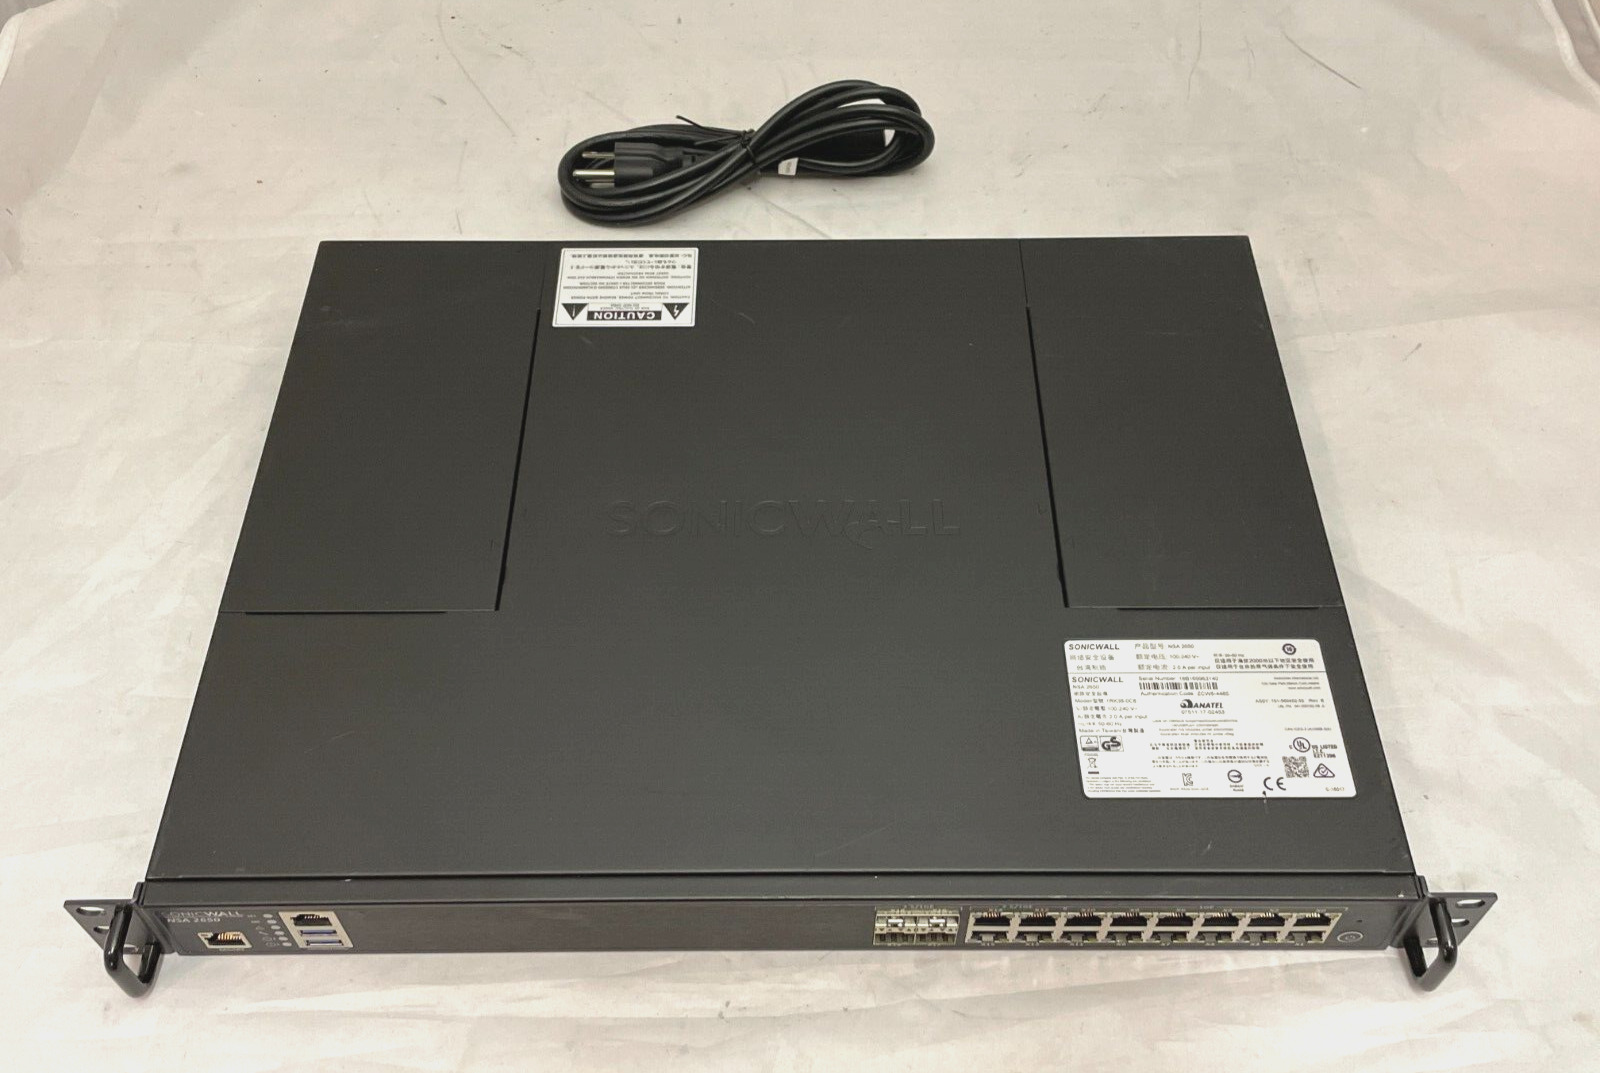 SonicWall NSA 2650 Network Security Appliance 1RK38-0C8 w/ Power Cord